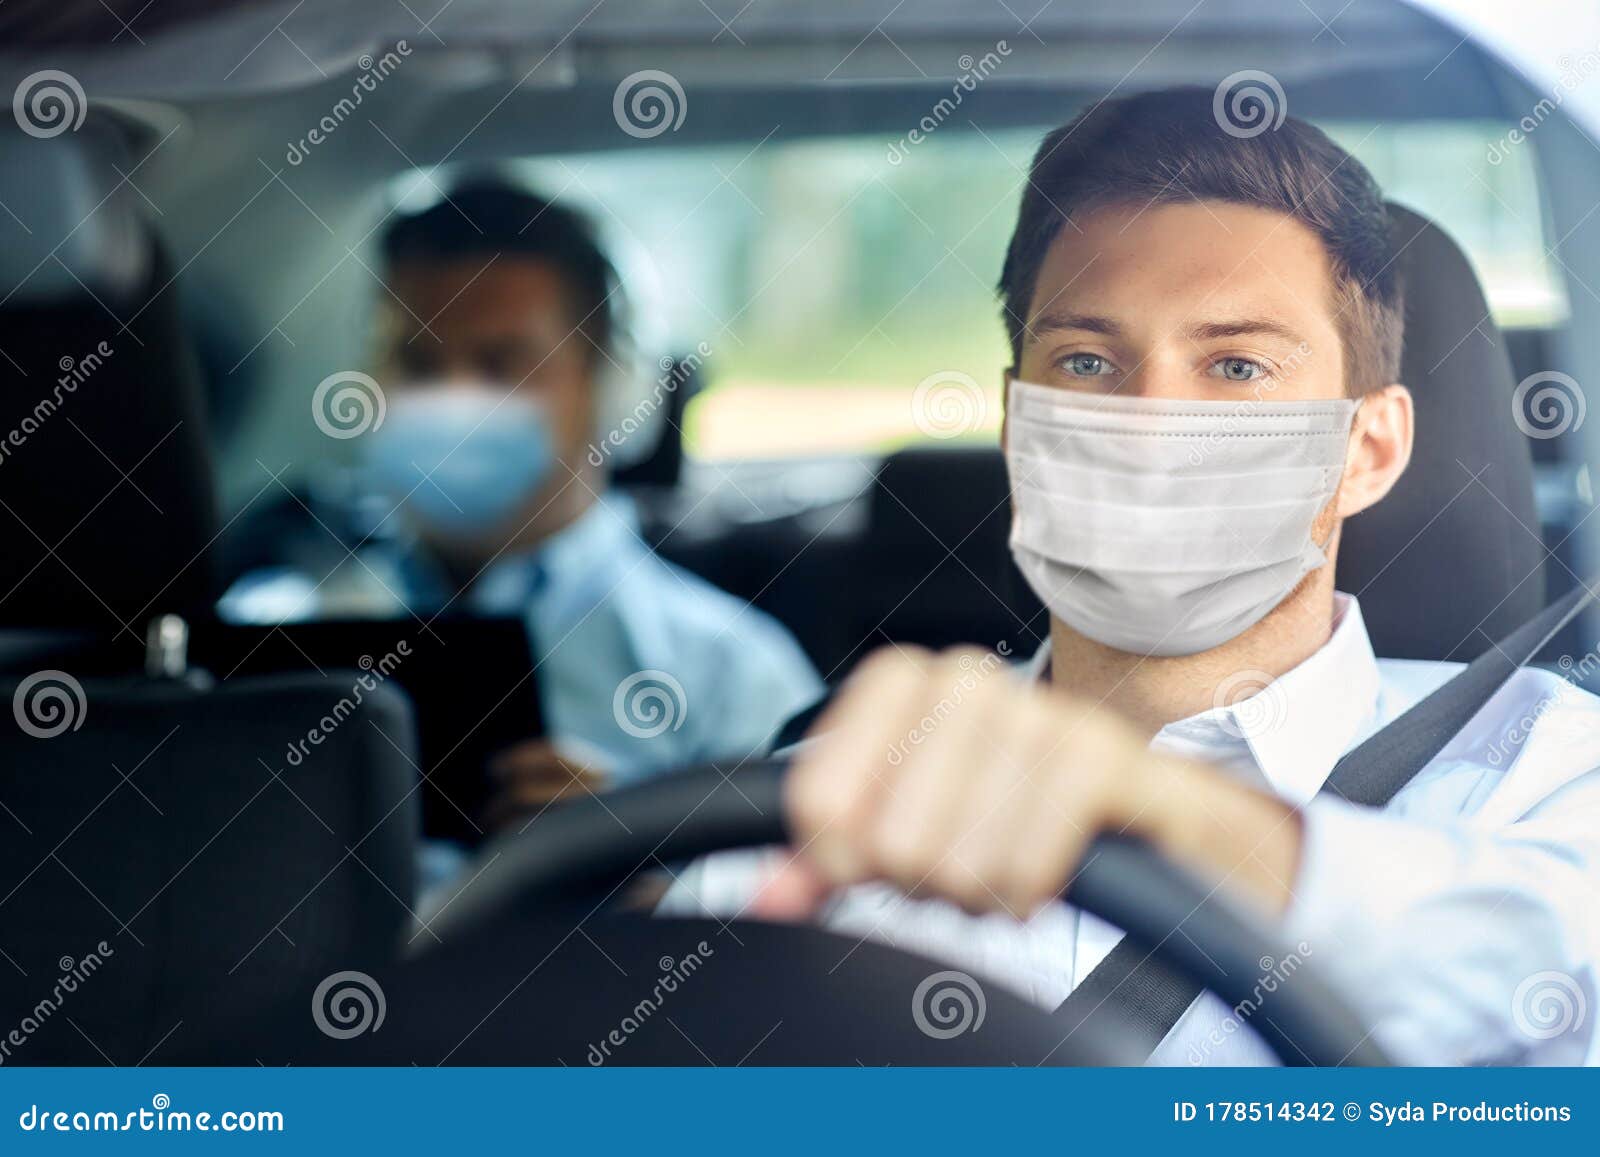 taxi driver in face protective mask driving car